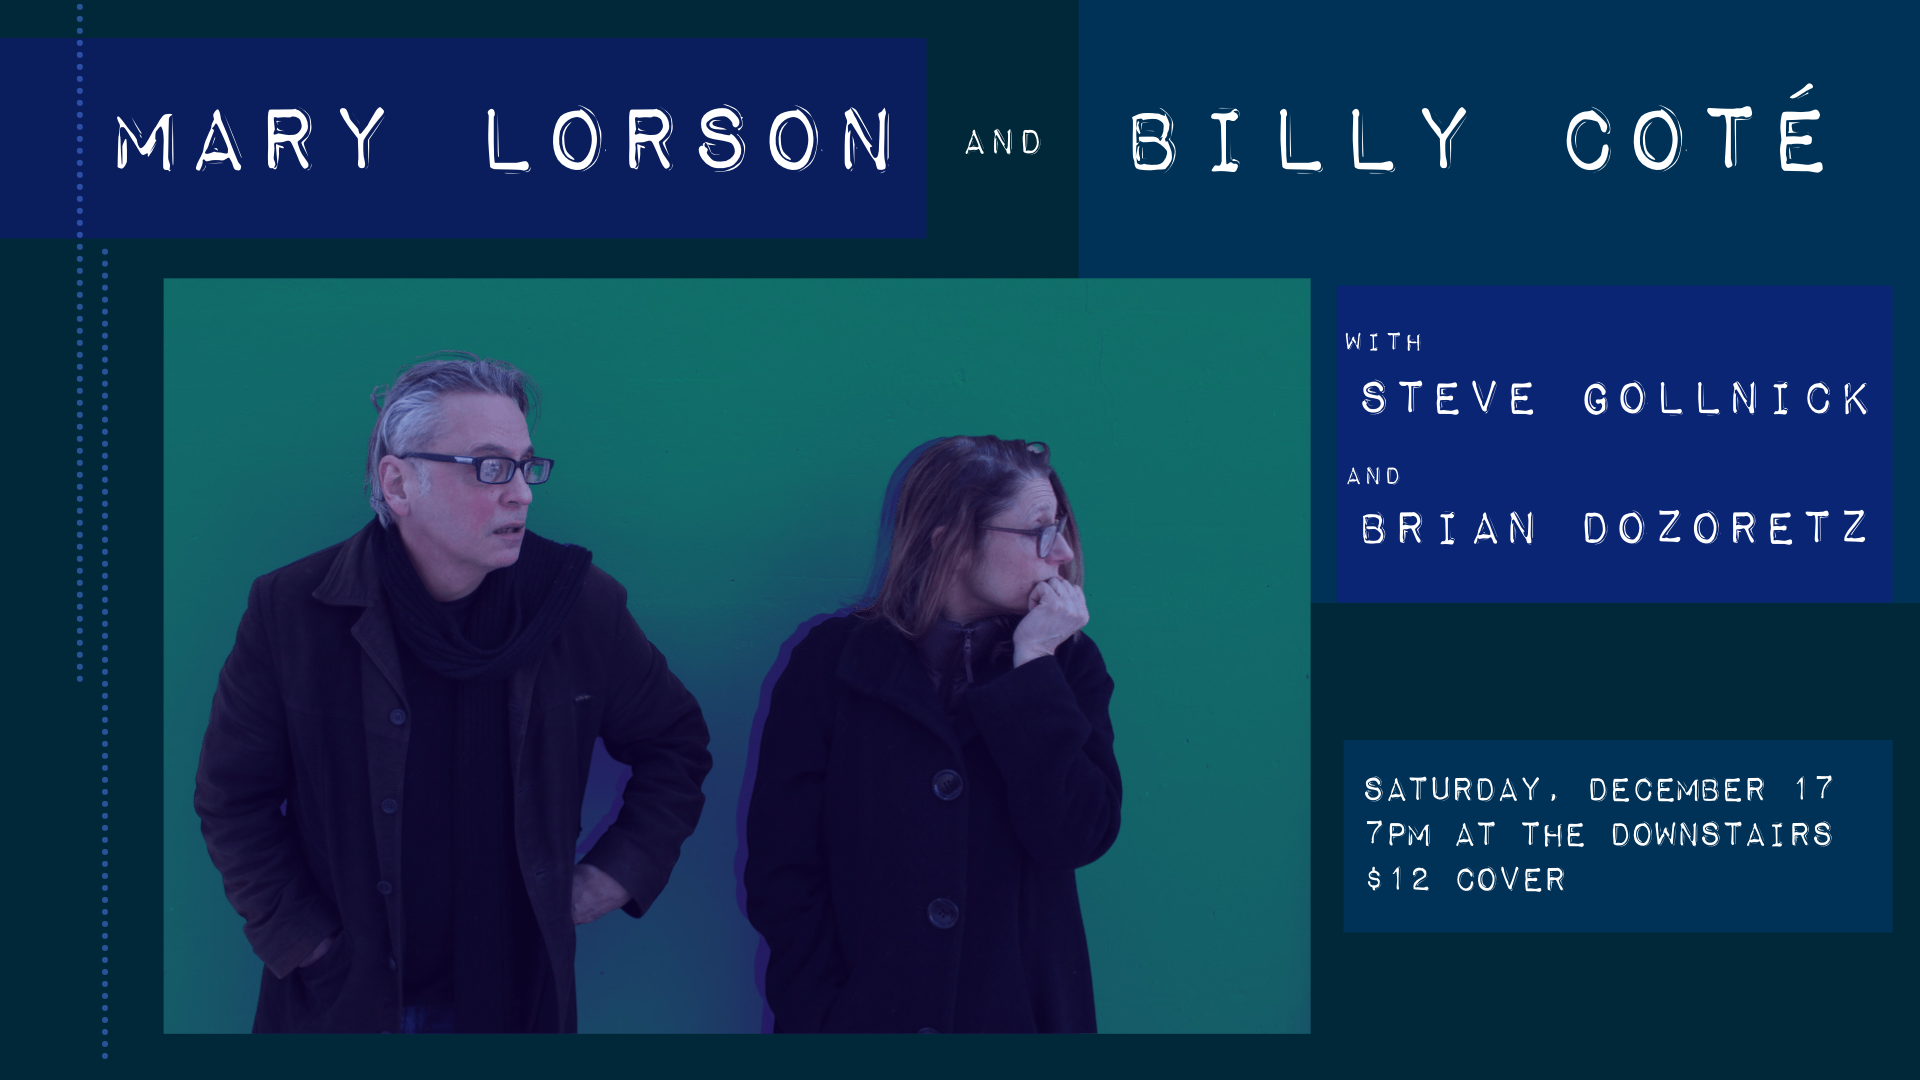 Mary Lorson & Billy Coté, with Steve Gollnick @ The Downstairs